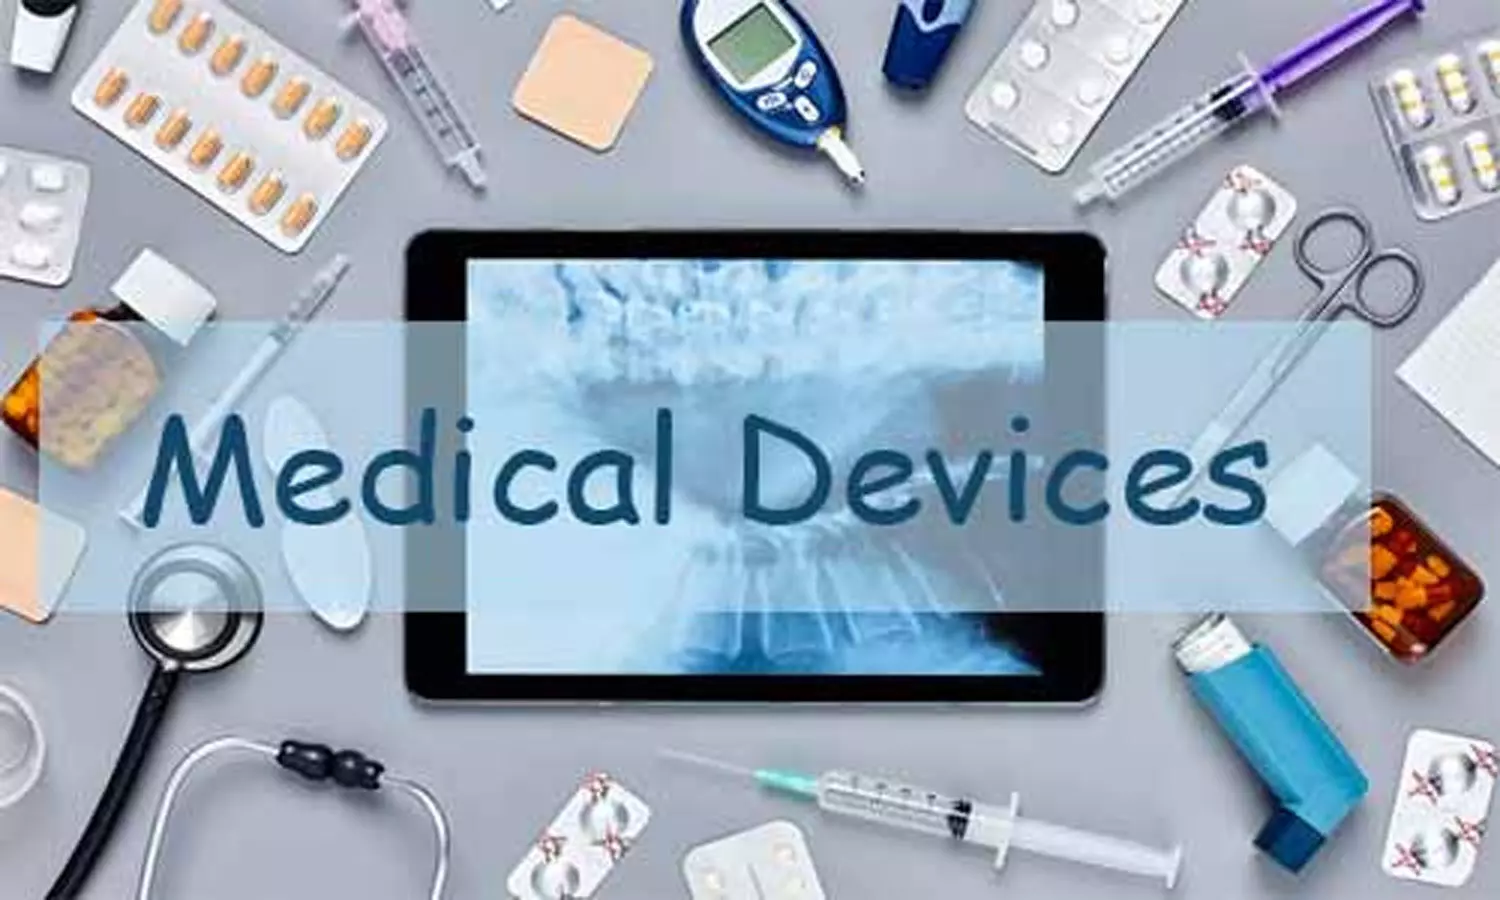 Union Minister Mansukh Mandaviya urges to boost local production of medical devices, says sector has potential growth